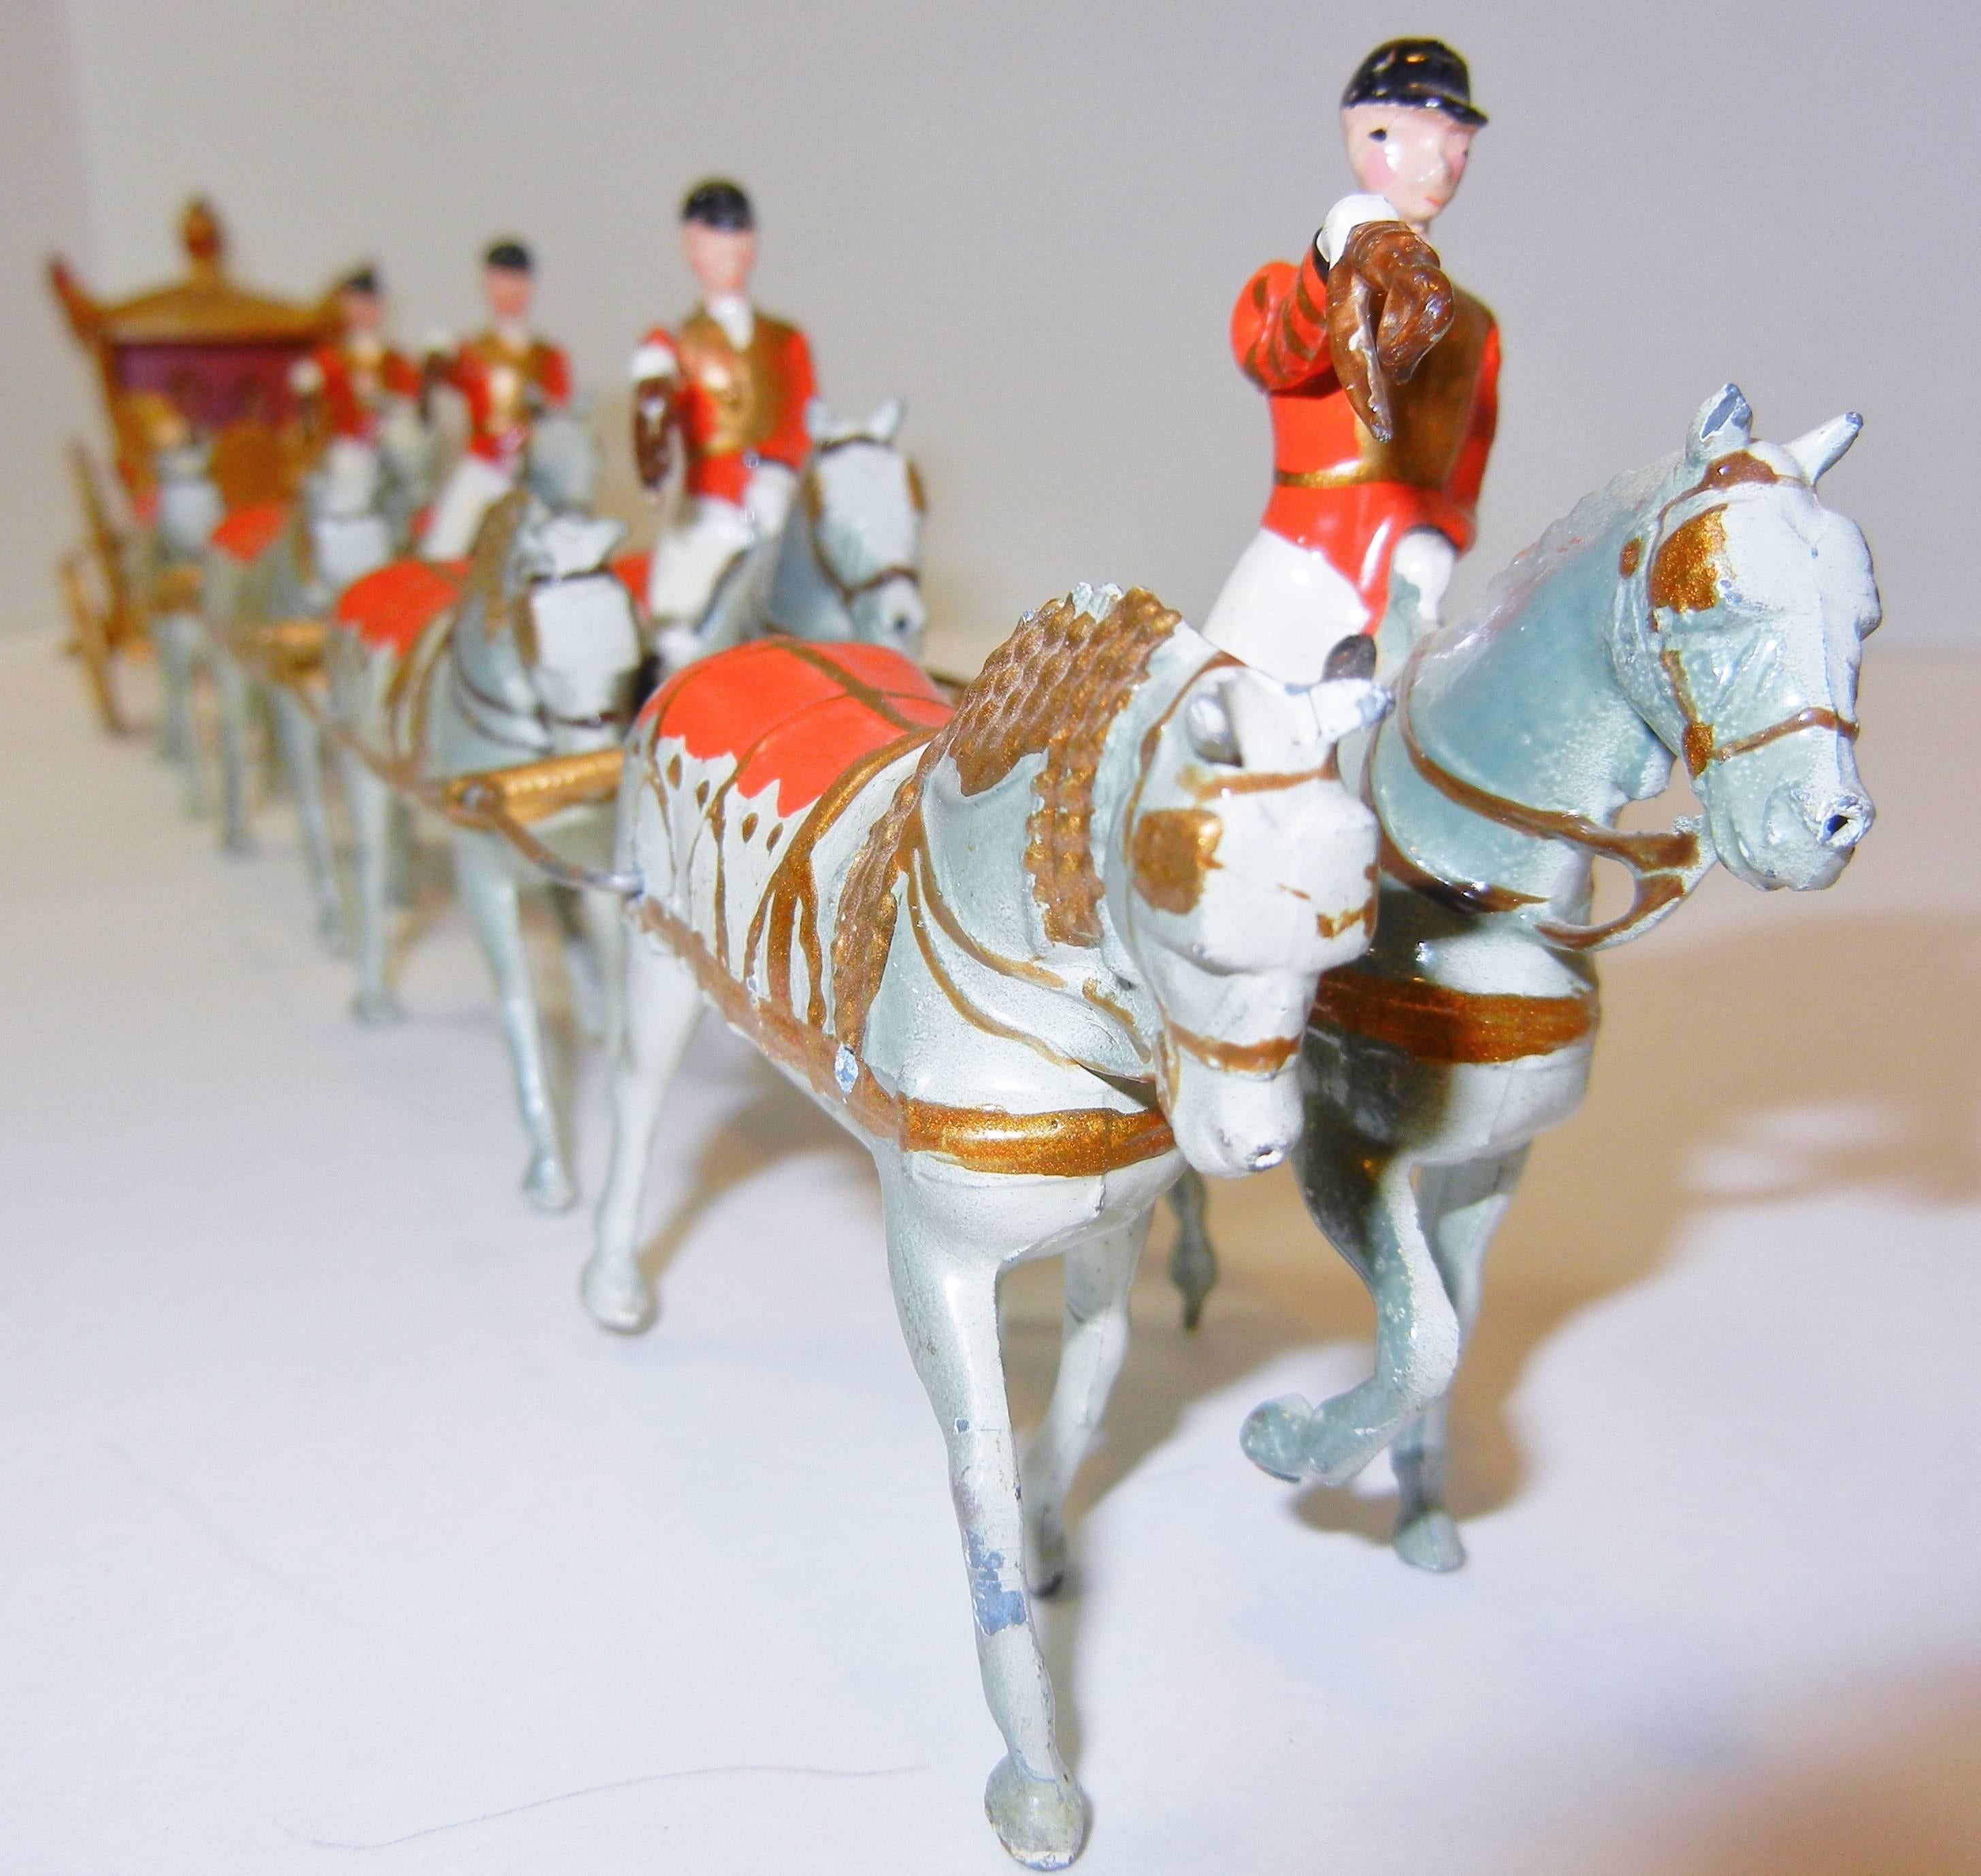 Cast George VI Coronation of 1937, Toy State Coach of England by W. Britain Ltd